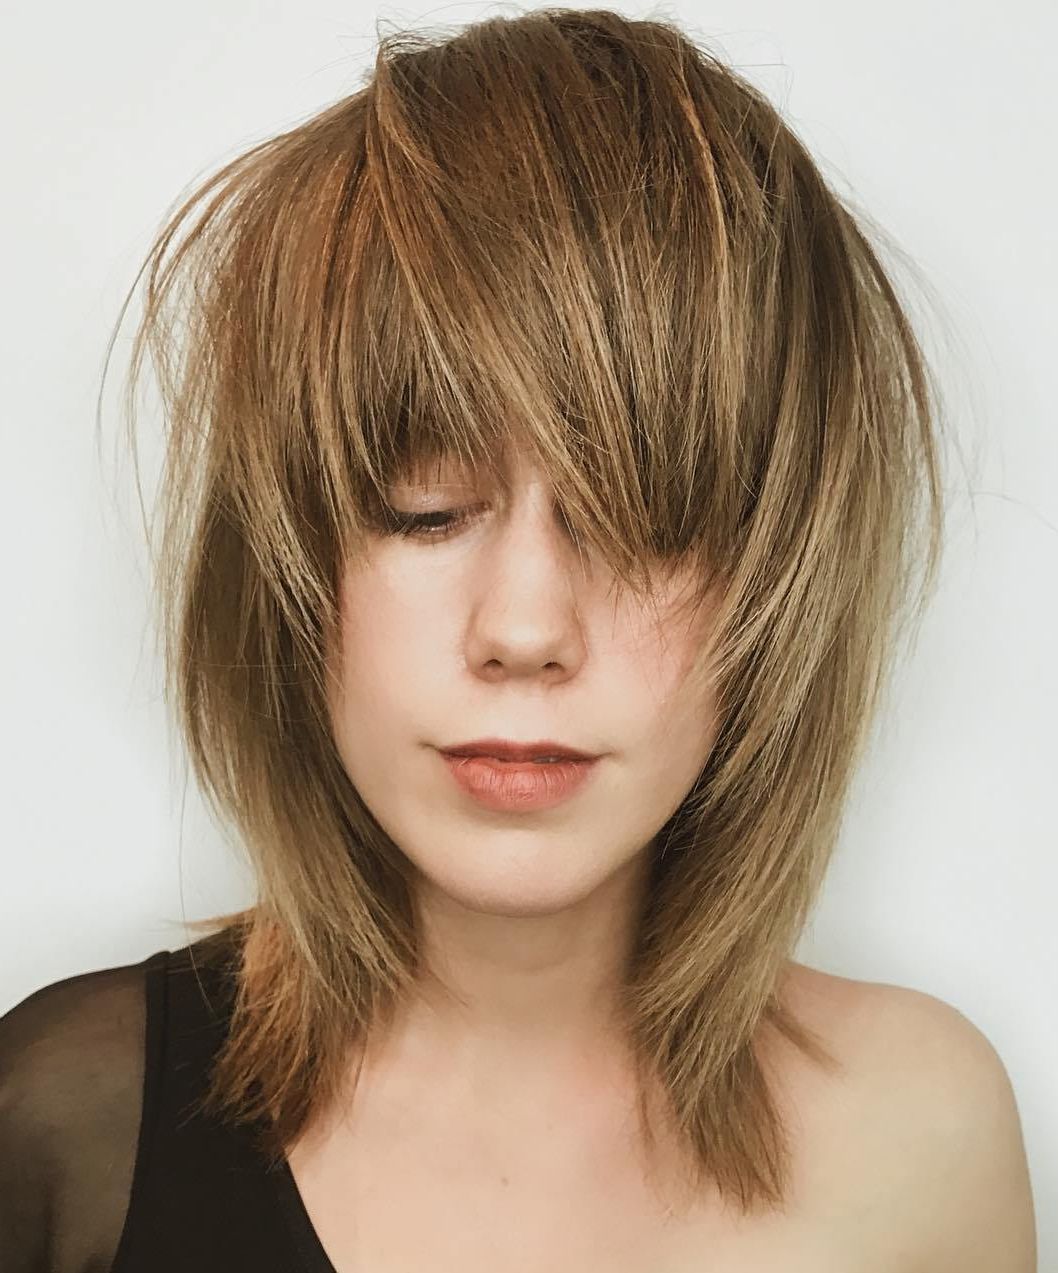 The Most Instagrammable Hairstyles With Bangs In 2019 For Well Known Feathered Golden Brown Haircuts (View 15 of 20)